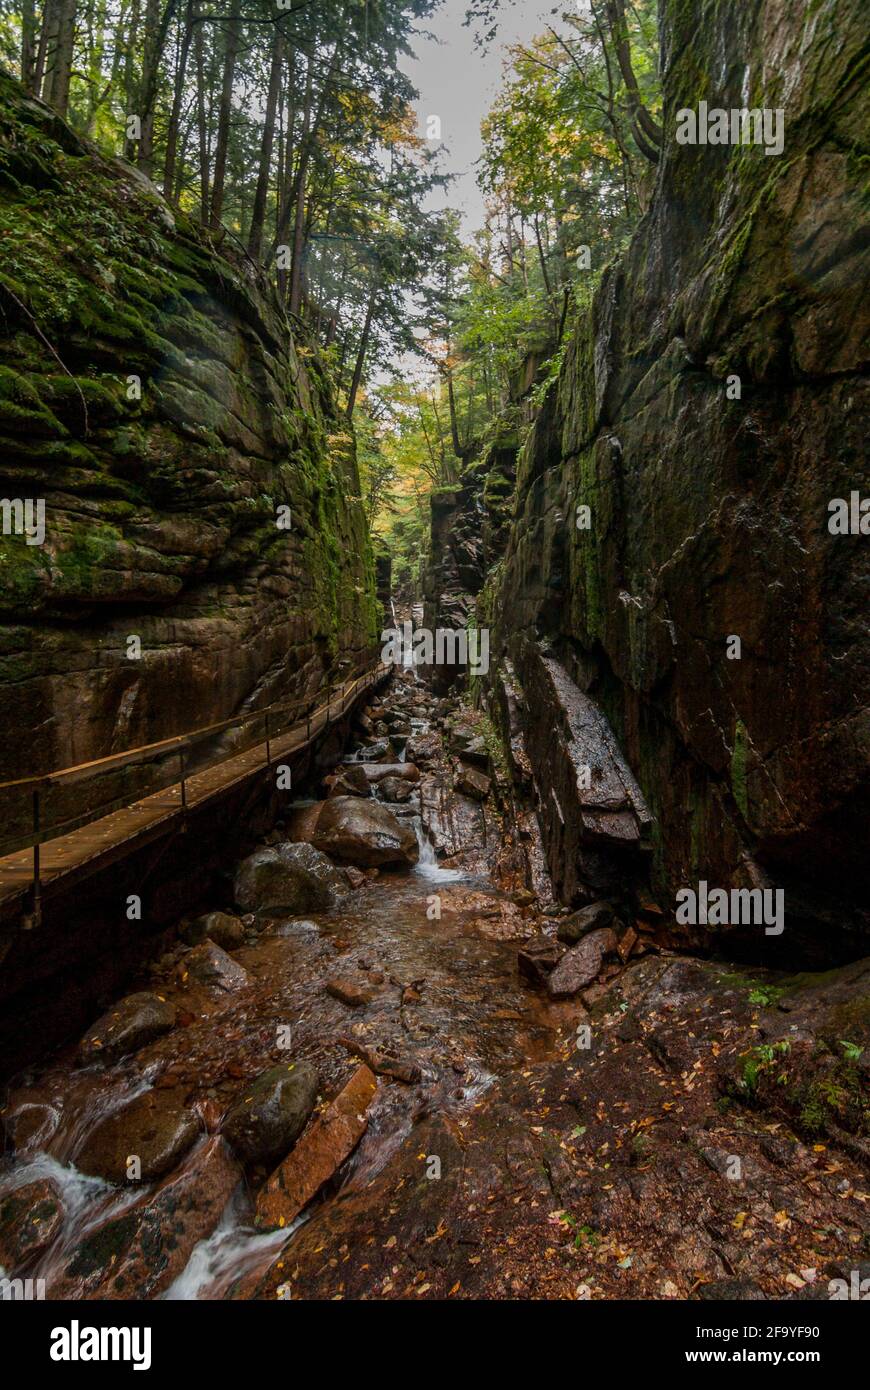 The steep, granite walls of Flume Gorge in Franconia Notch State Park, New Hampshire, USA, with the bed of the brook running through. Stock Photo